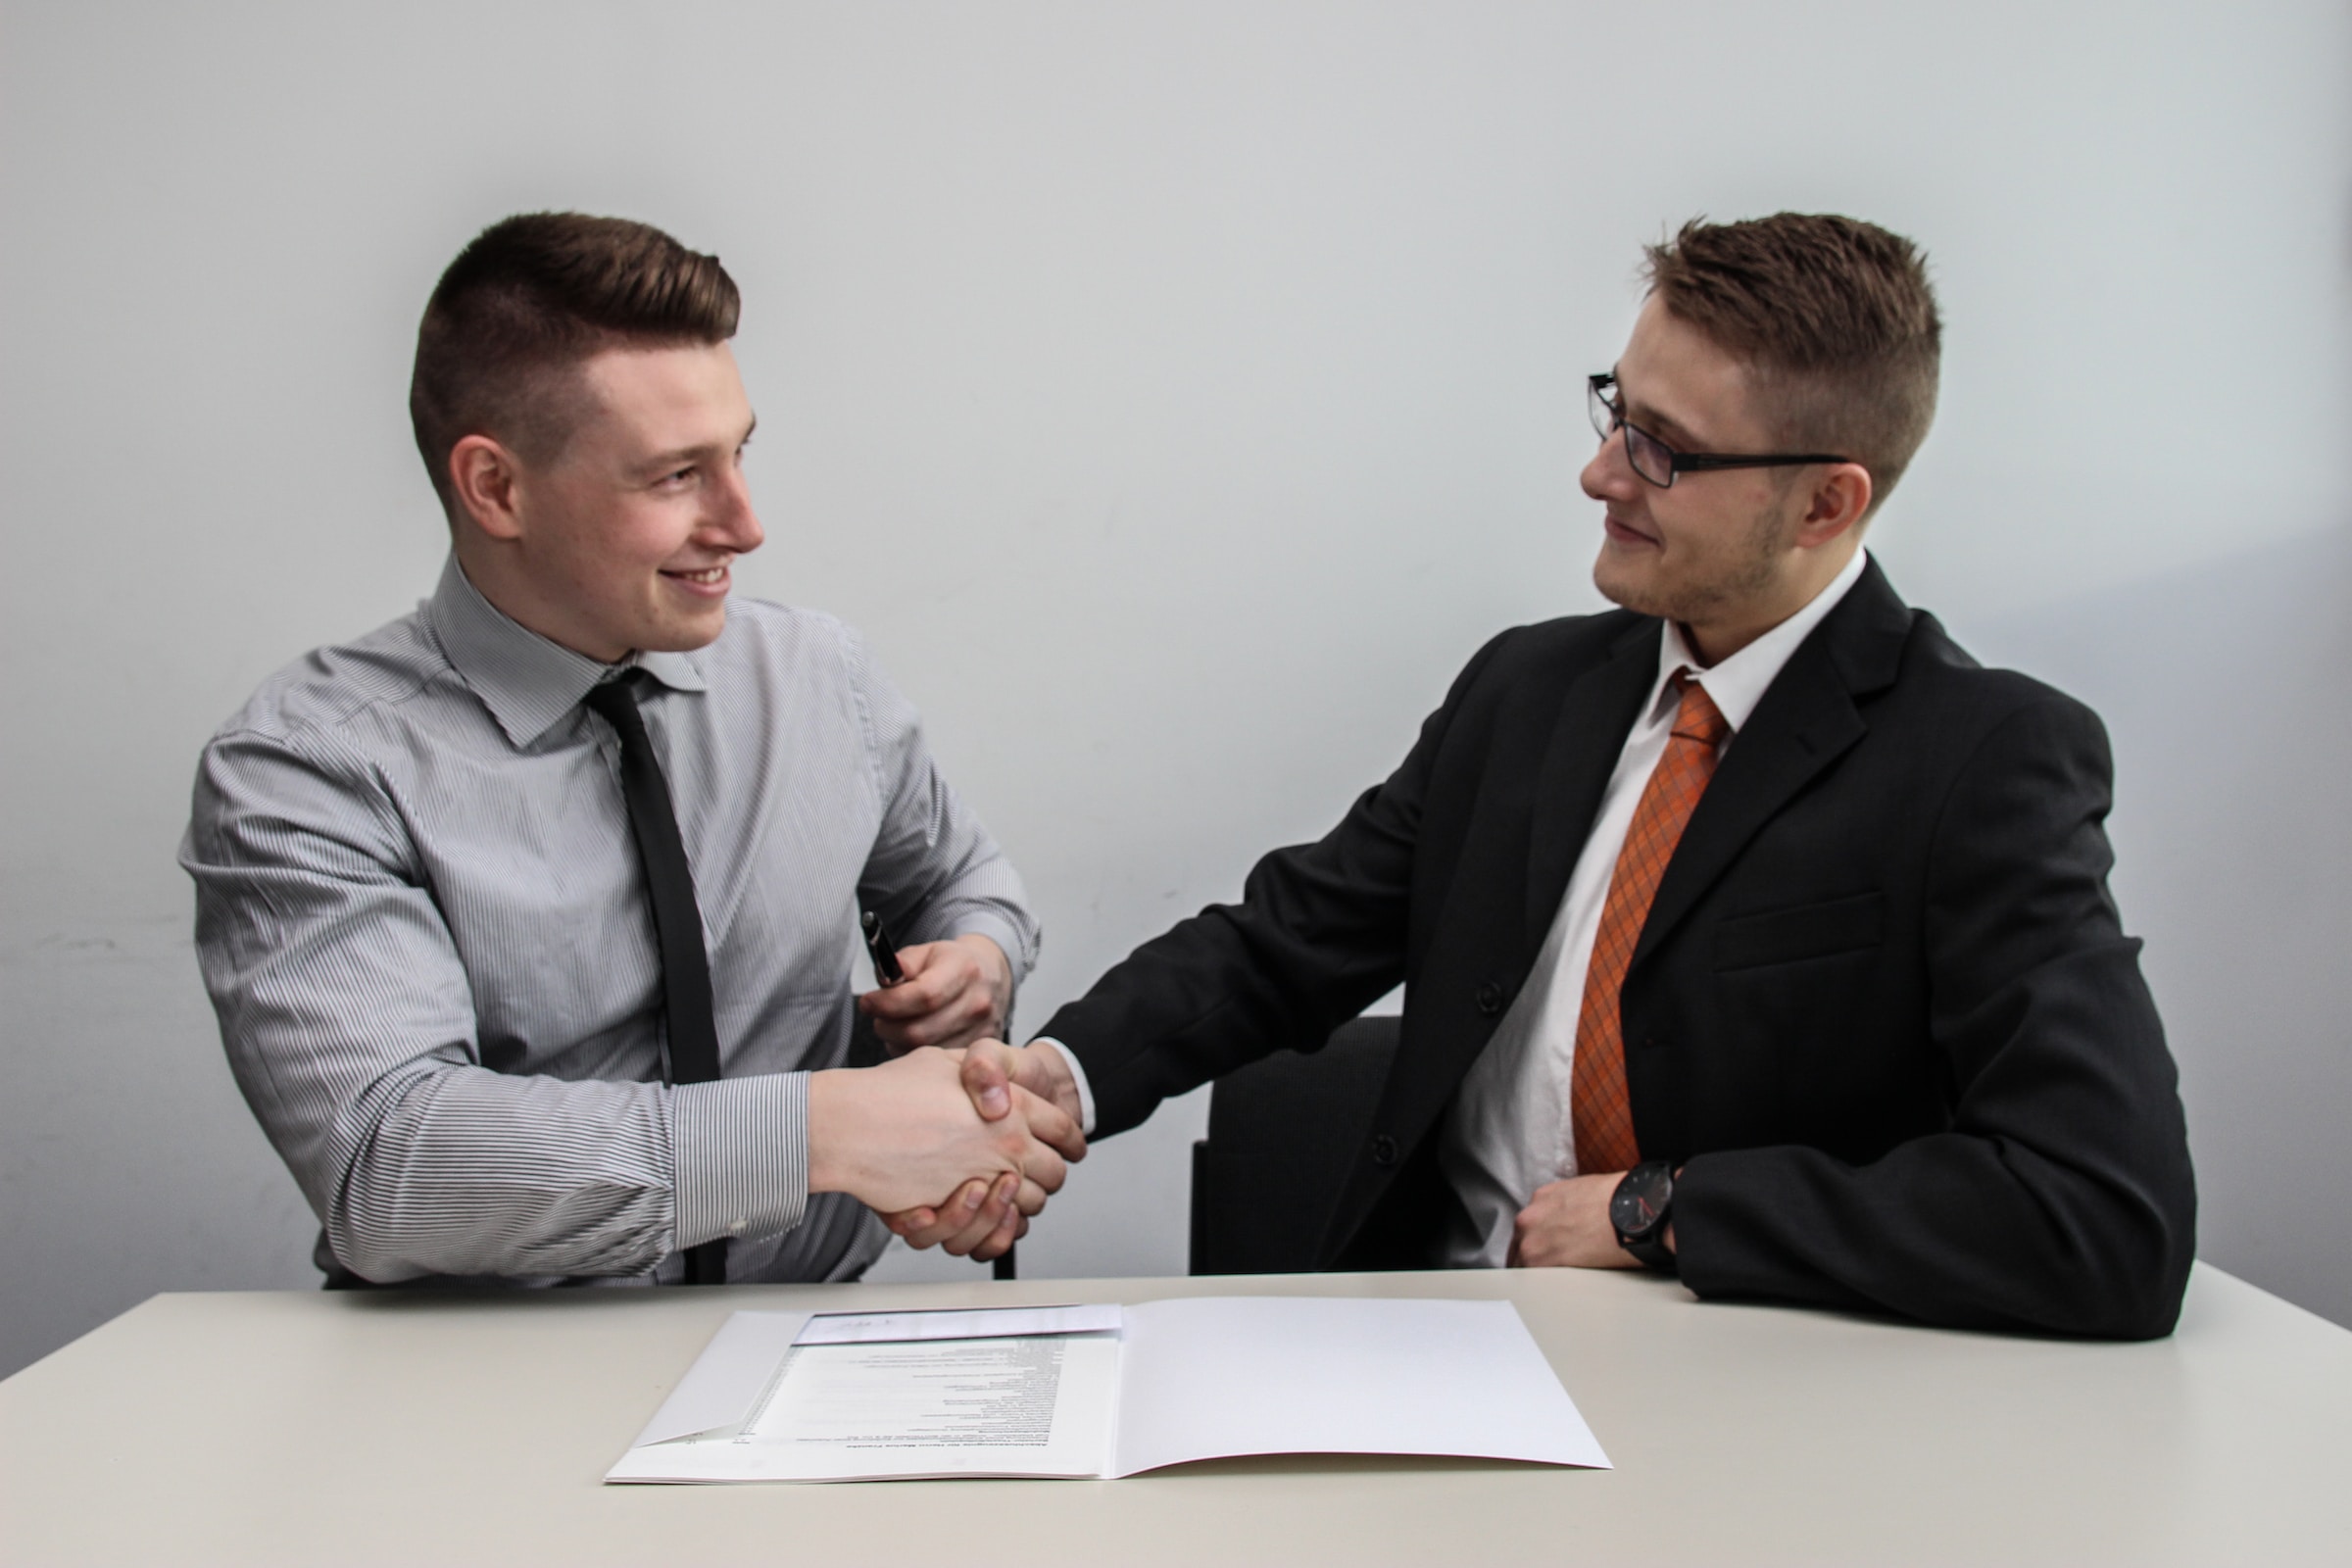 resume writing tips and tricks leads to a successful job interview